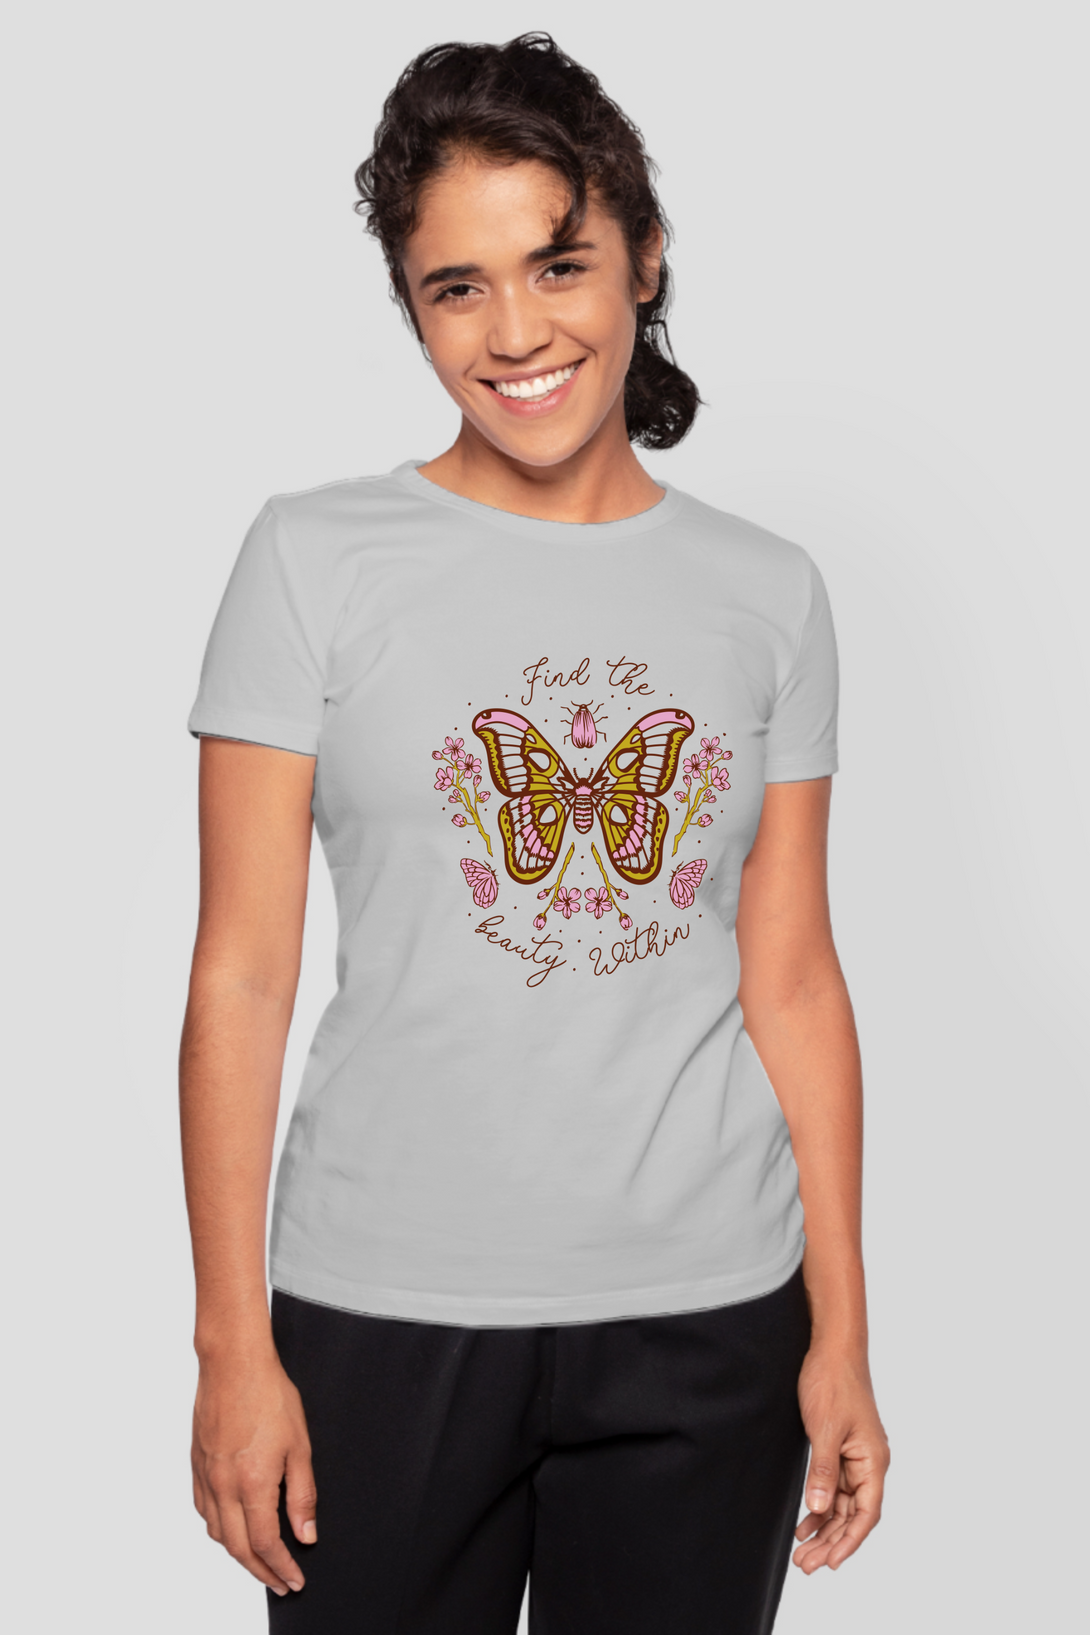 Find The Beauty Within Printed T-Shirt For Women - WowWaves - 7